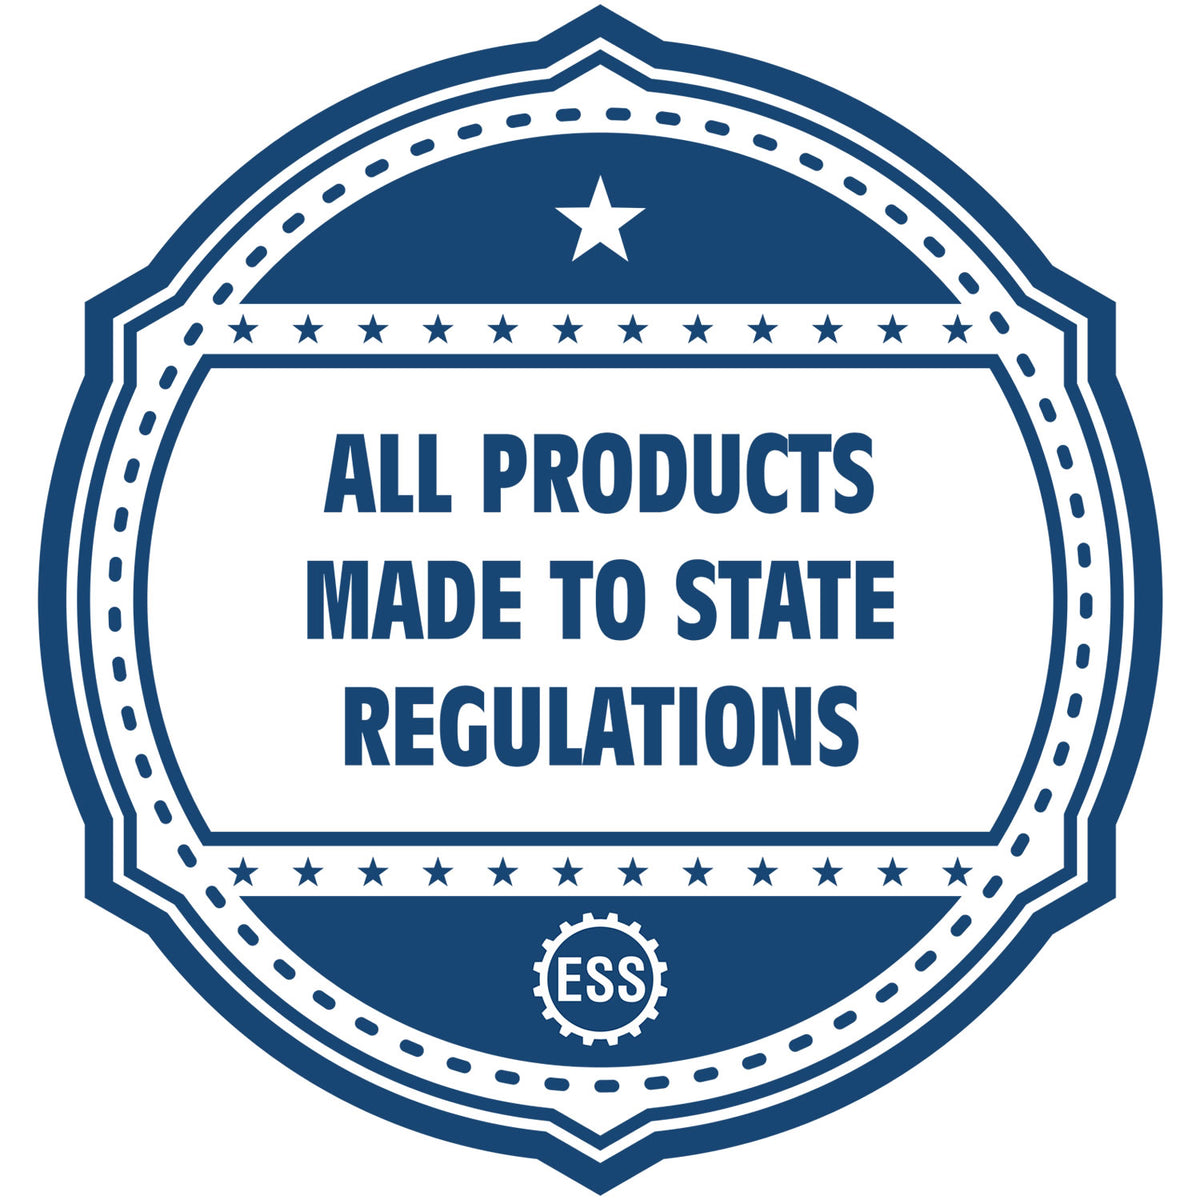 An icon or badge element for the Nebraska Professional Engineer Seal Stamp showing that this product is made in compliance with state regulations.